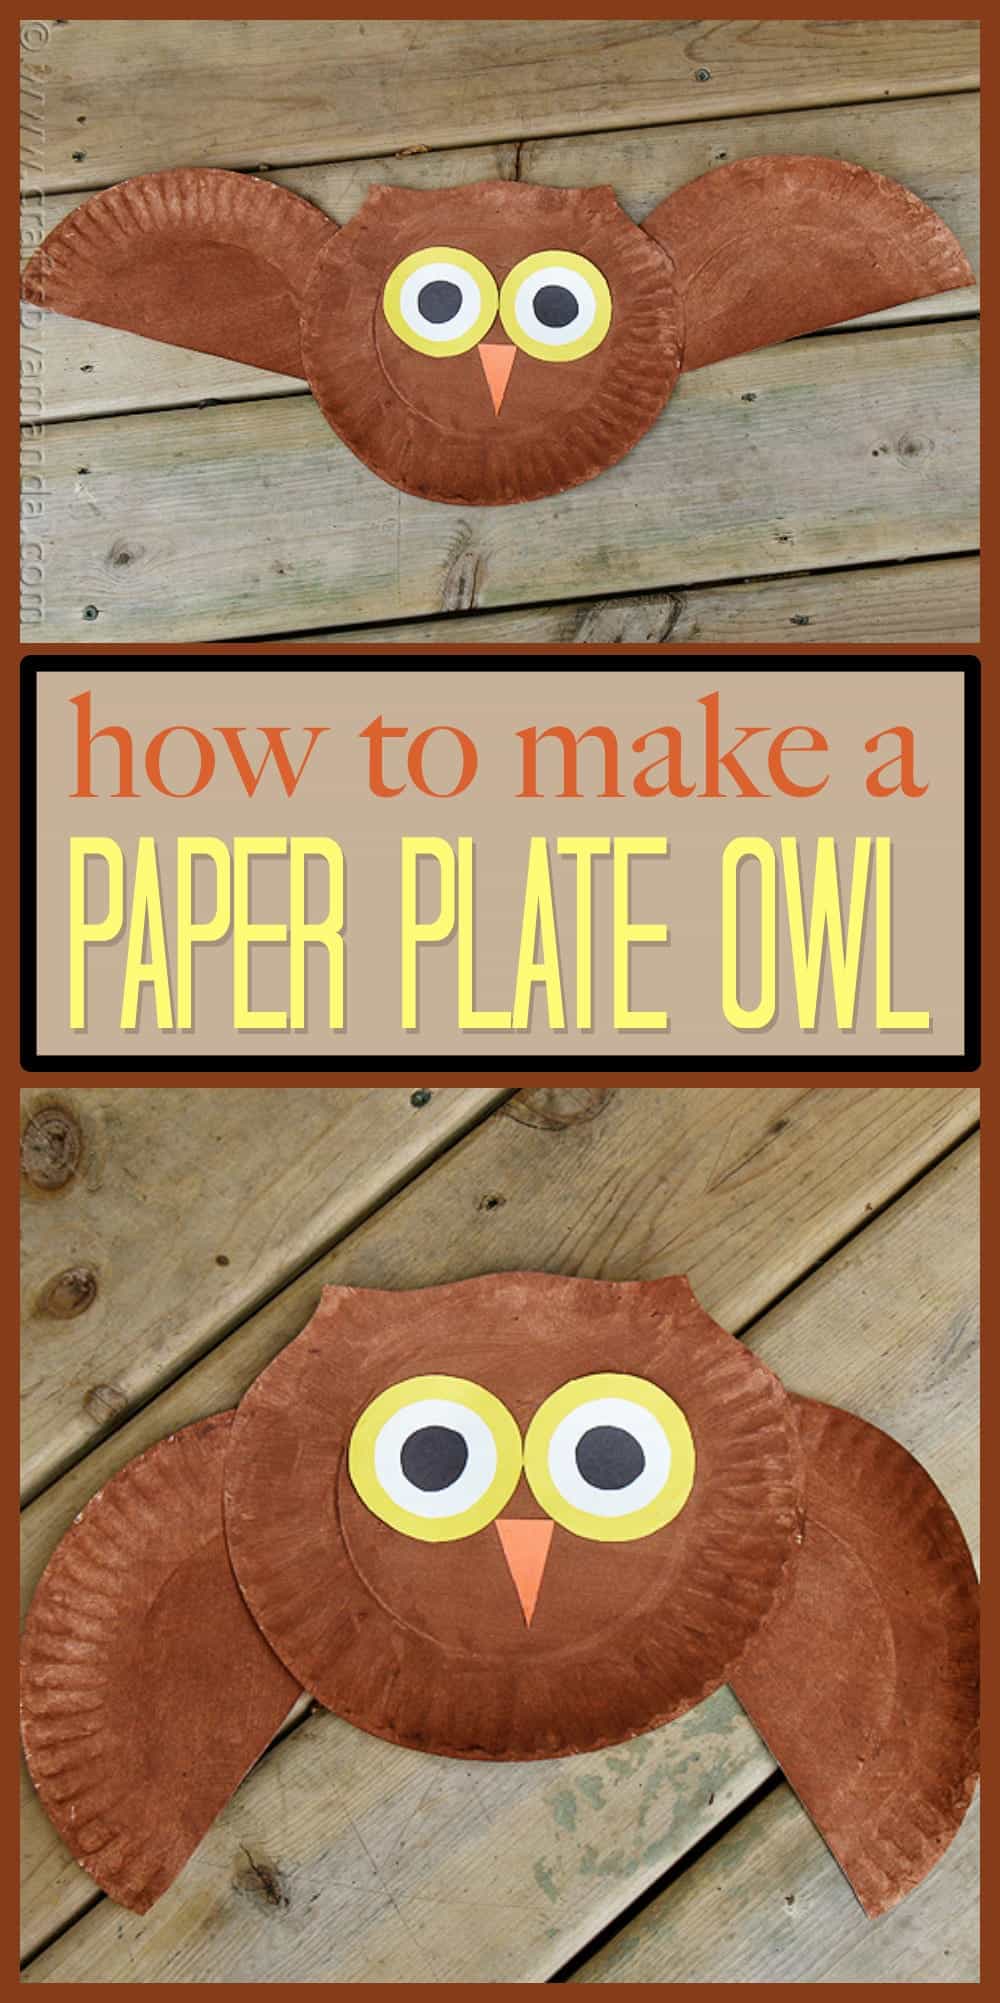 This super easy owl craft is great for young kids, even the smallest can do this with help! Make this fun paper plate owl with your kids today.